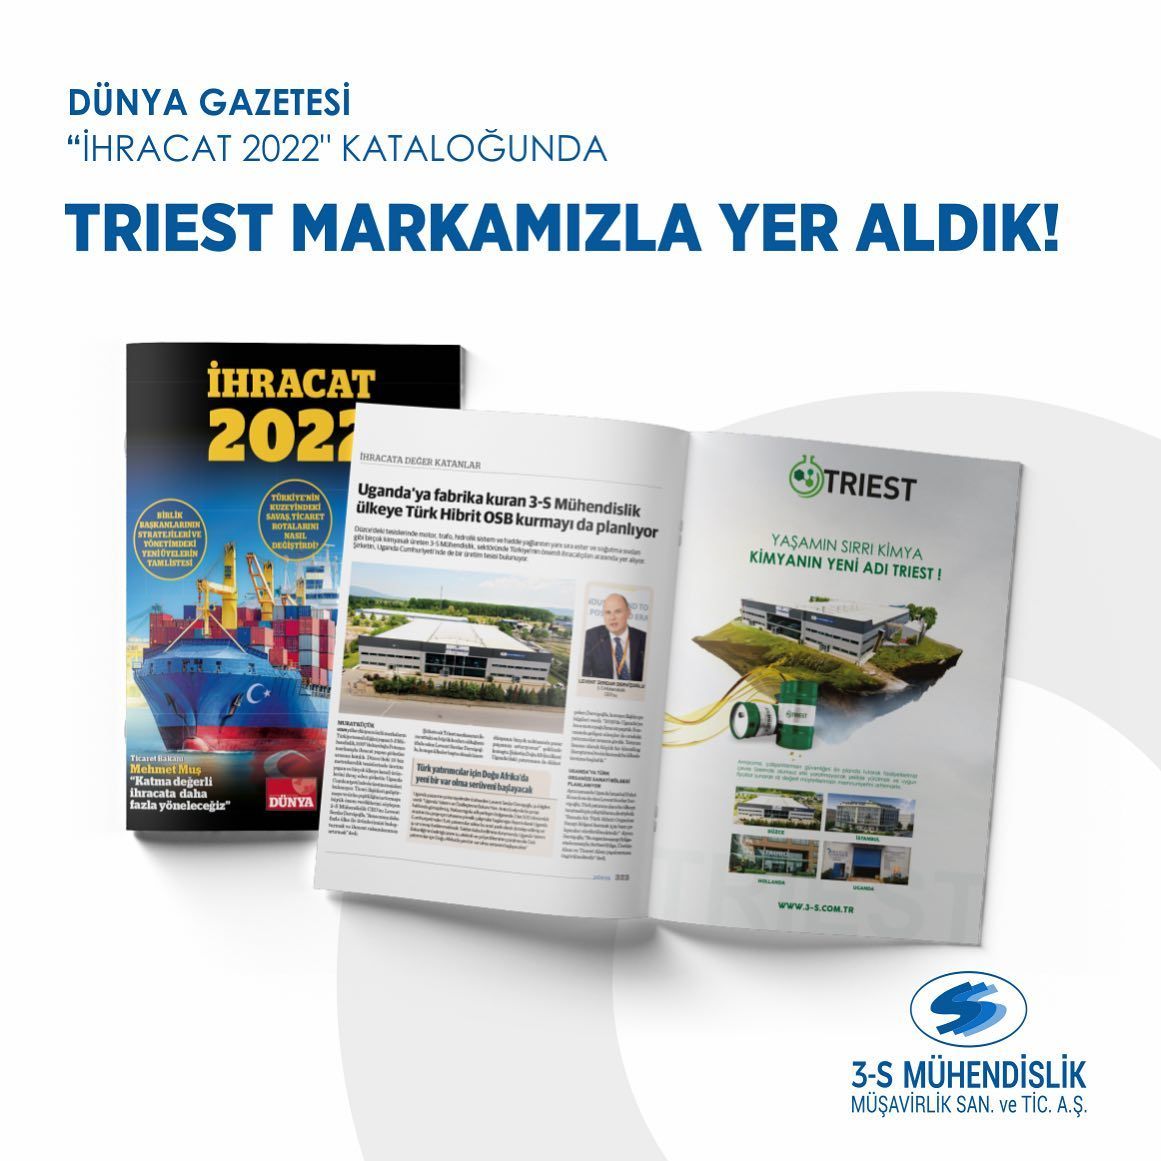 We took part in the World Newspaper "Export 2022" catalog with our TRIEST brand!